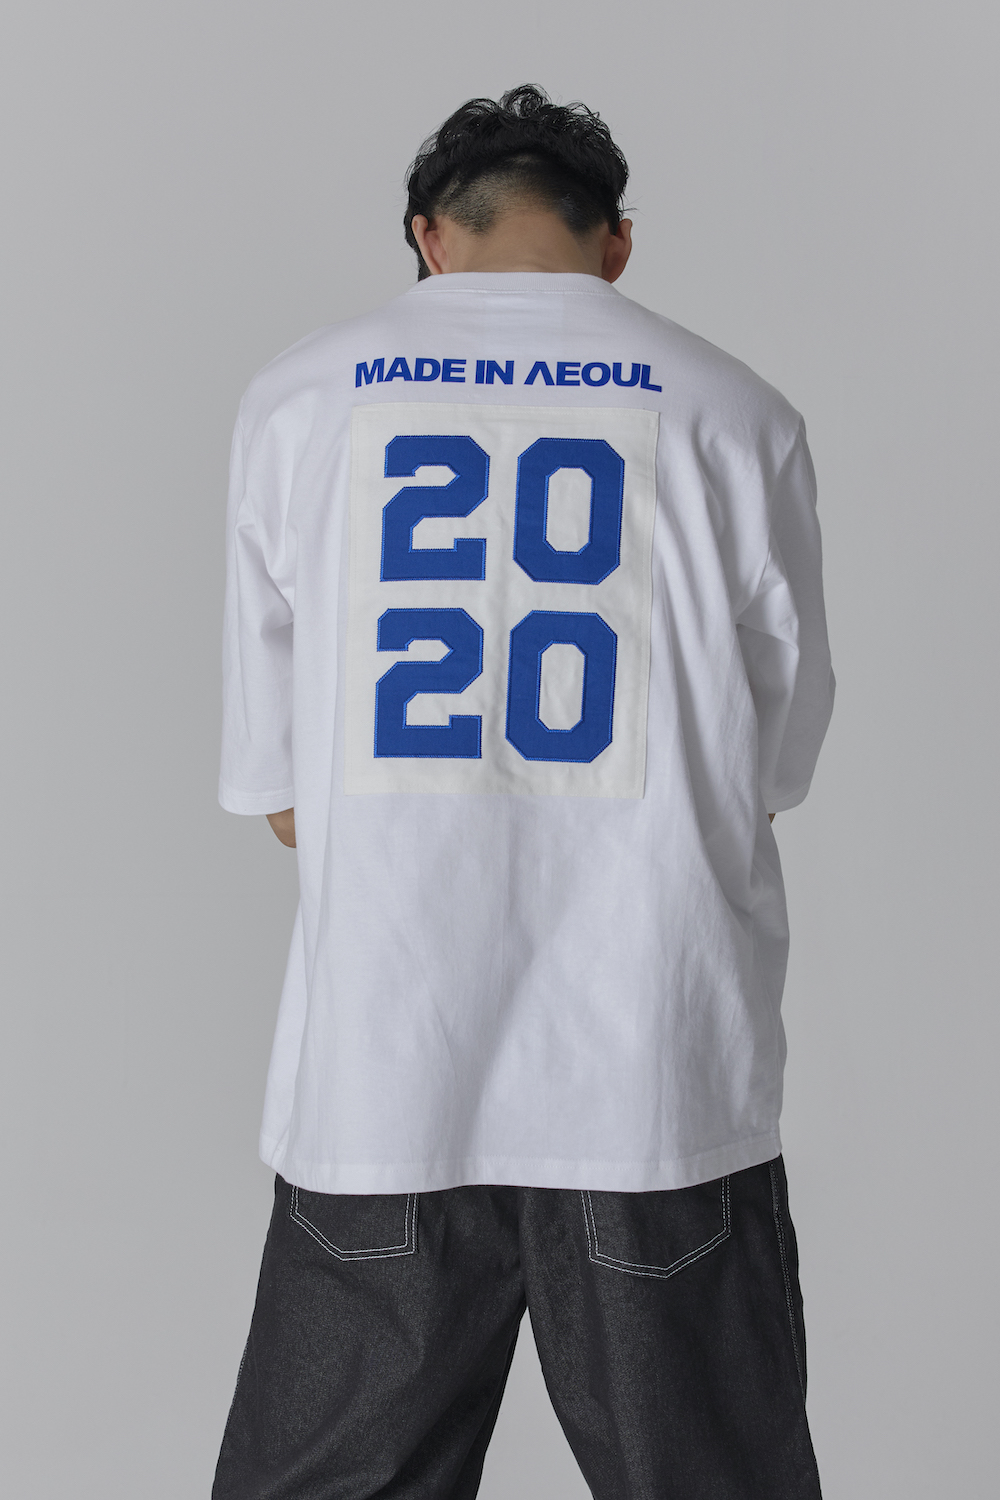 MADE IN SEOUL 2020 T SHIRT WHITE